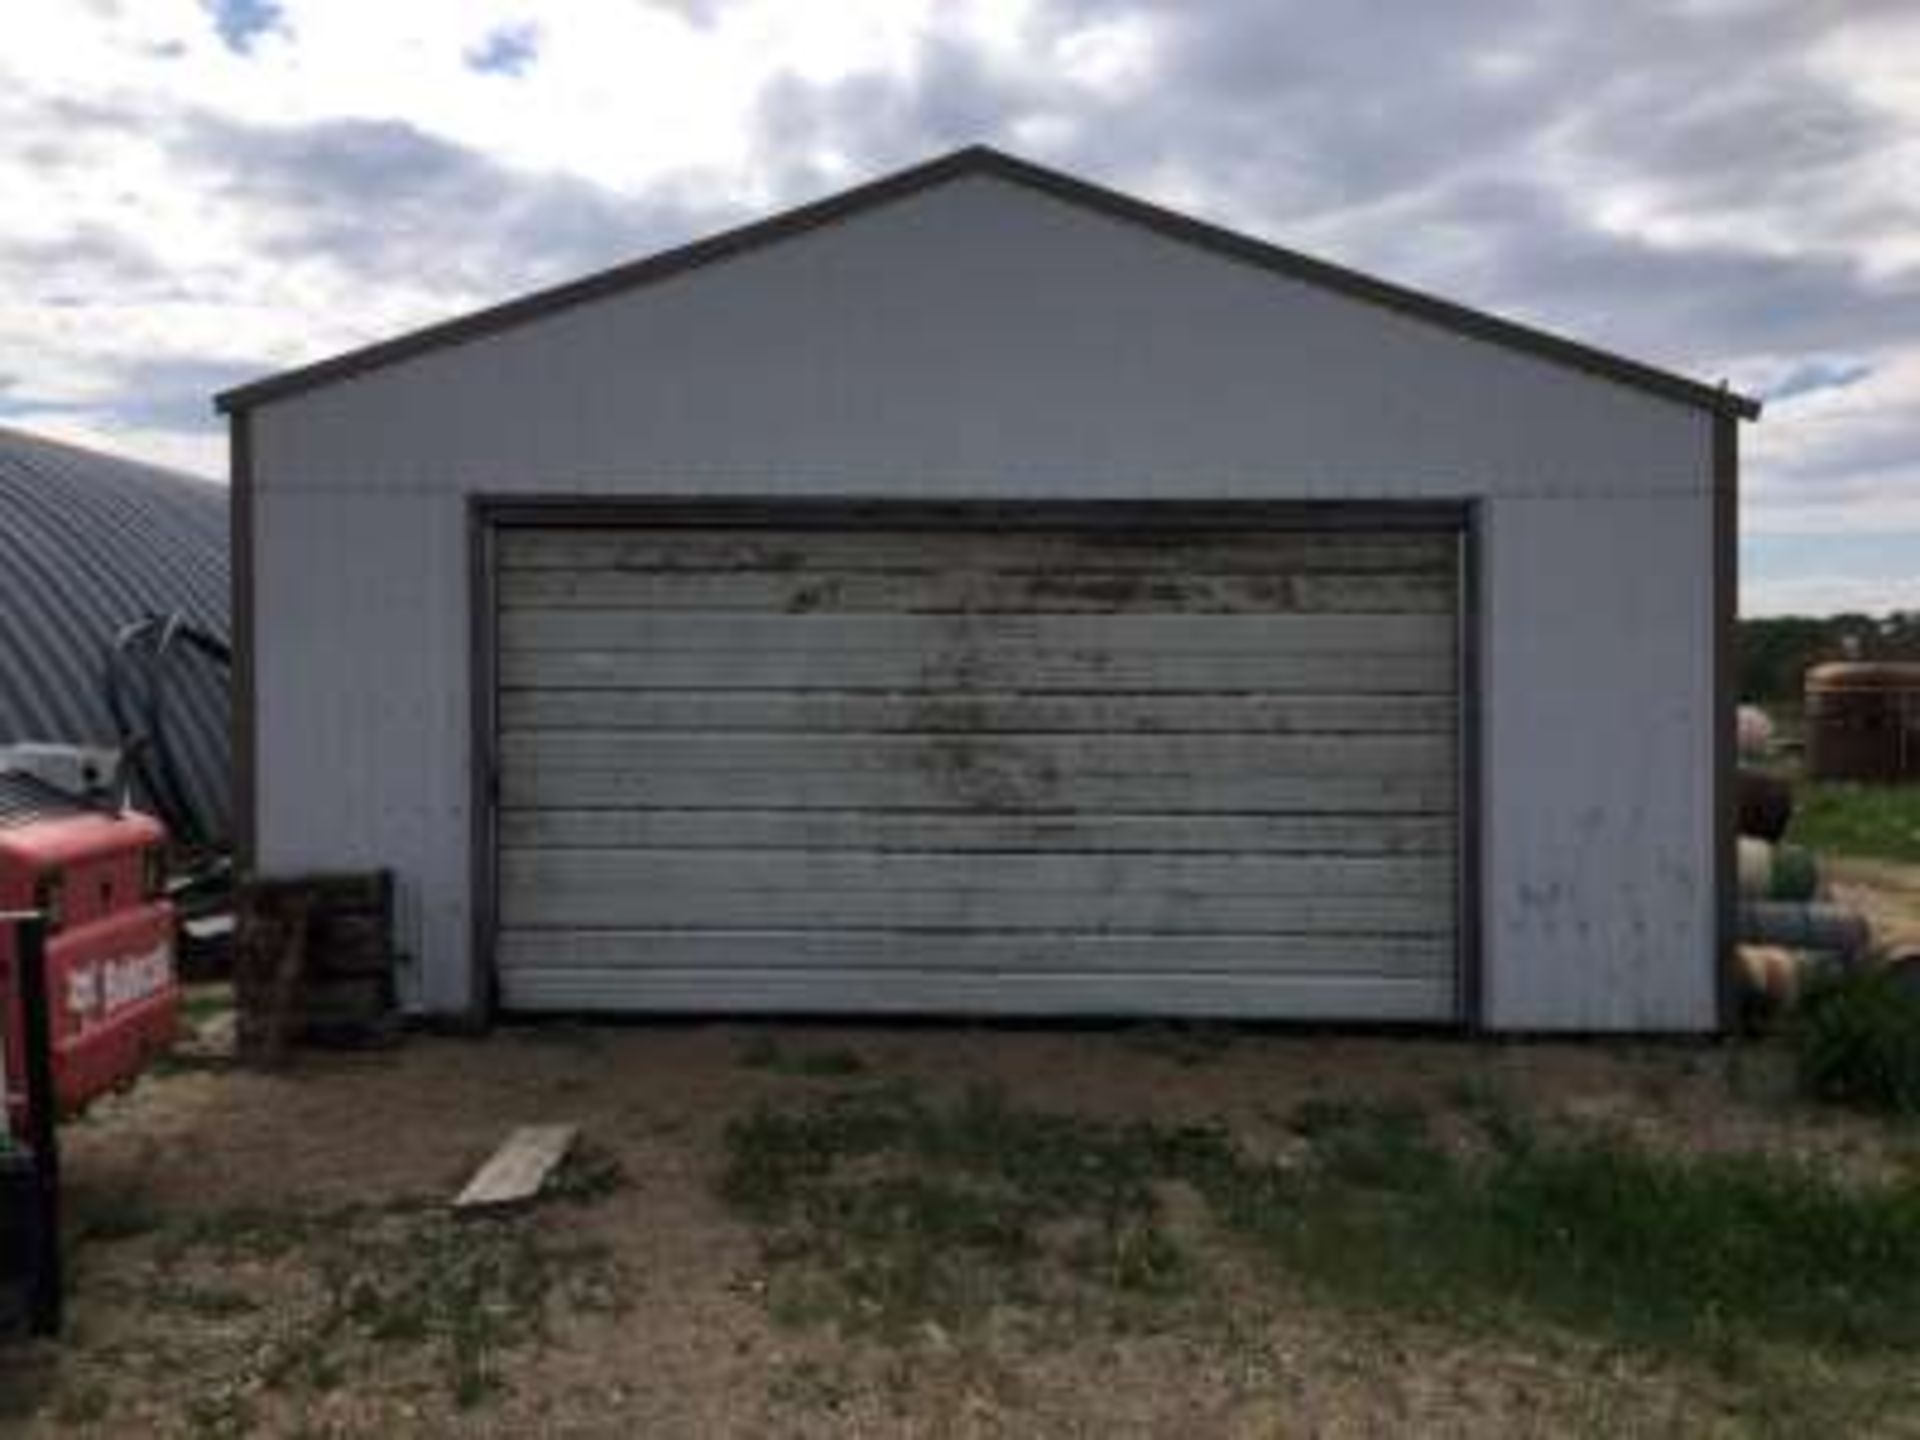 24ft x 24 ft farm shed building , metal roof and walls, 8 ft high x 16 ft wide door, metal - Image 4 of 6